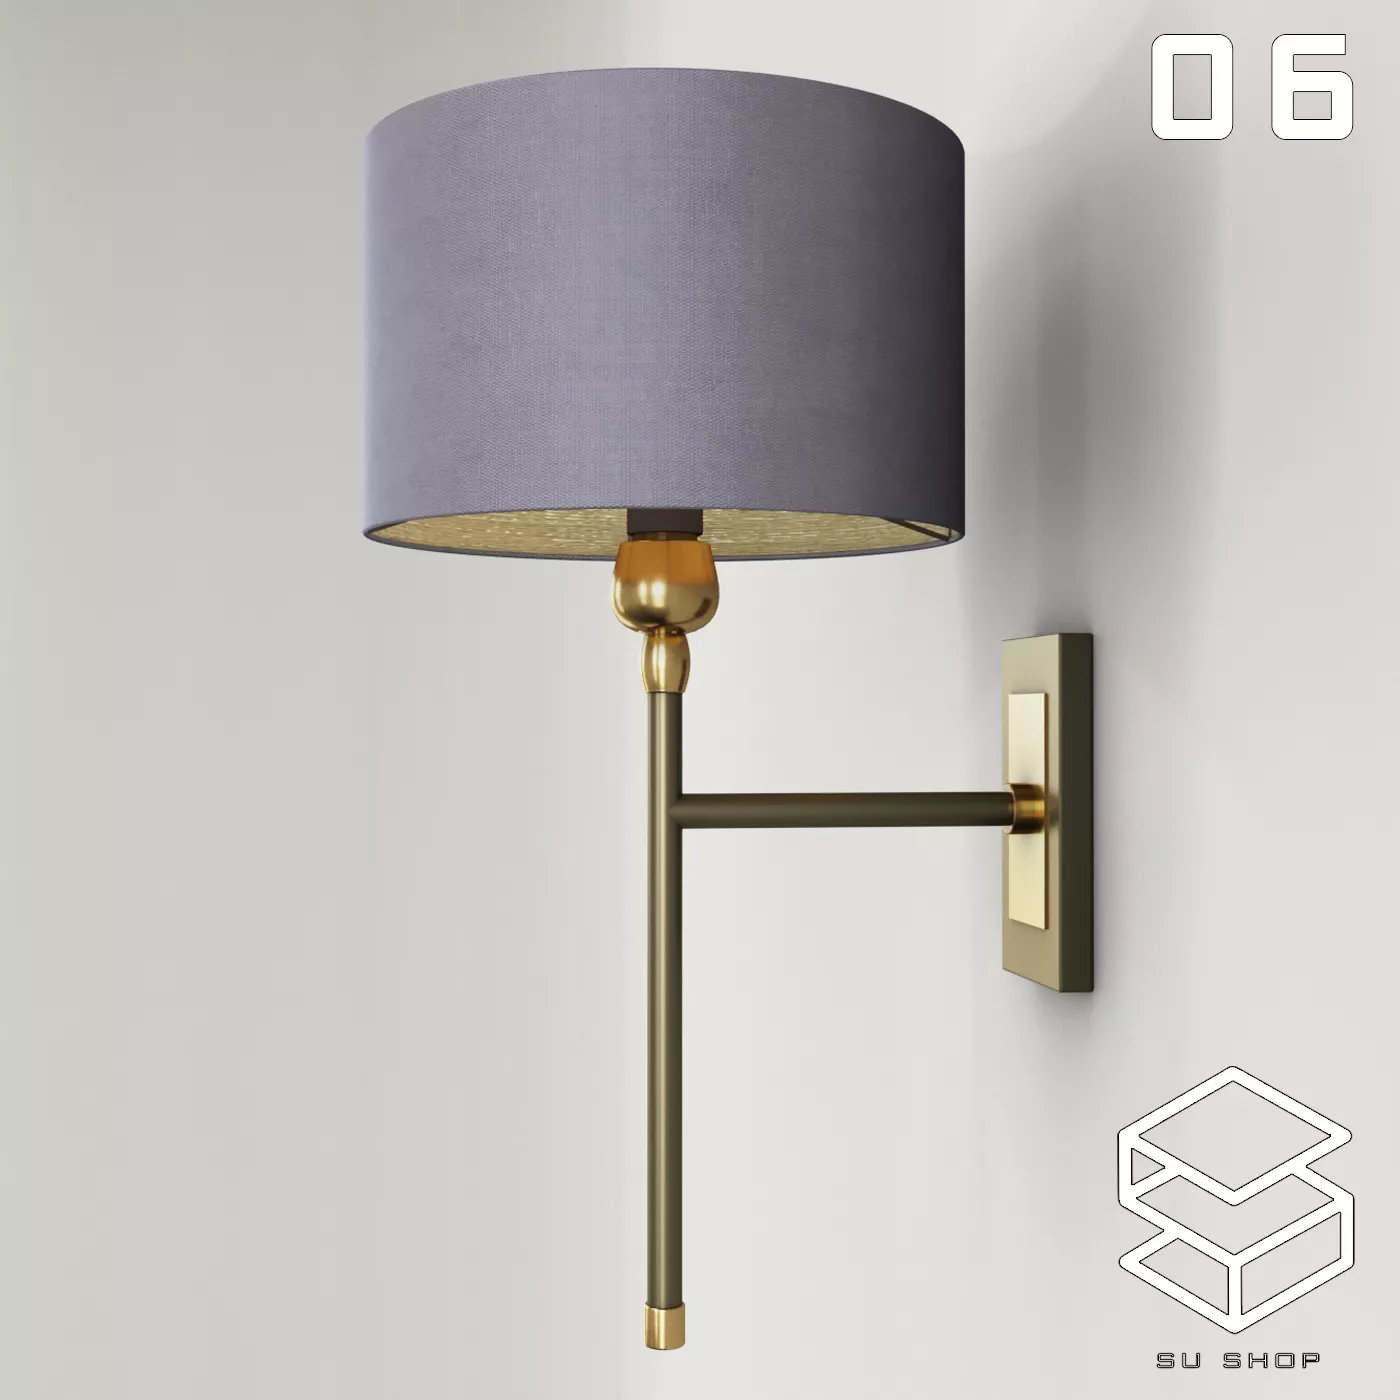 MODERN WALL LAMP - SKETCHUP 3D MODEL - VRAY OR ENSCAPE - ID16314